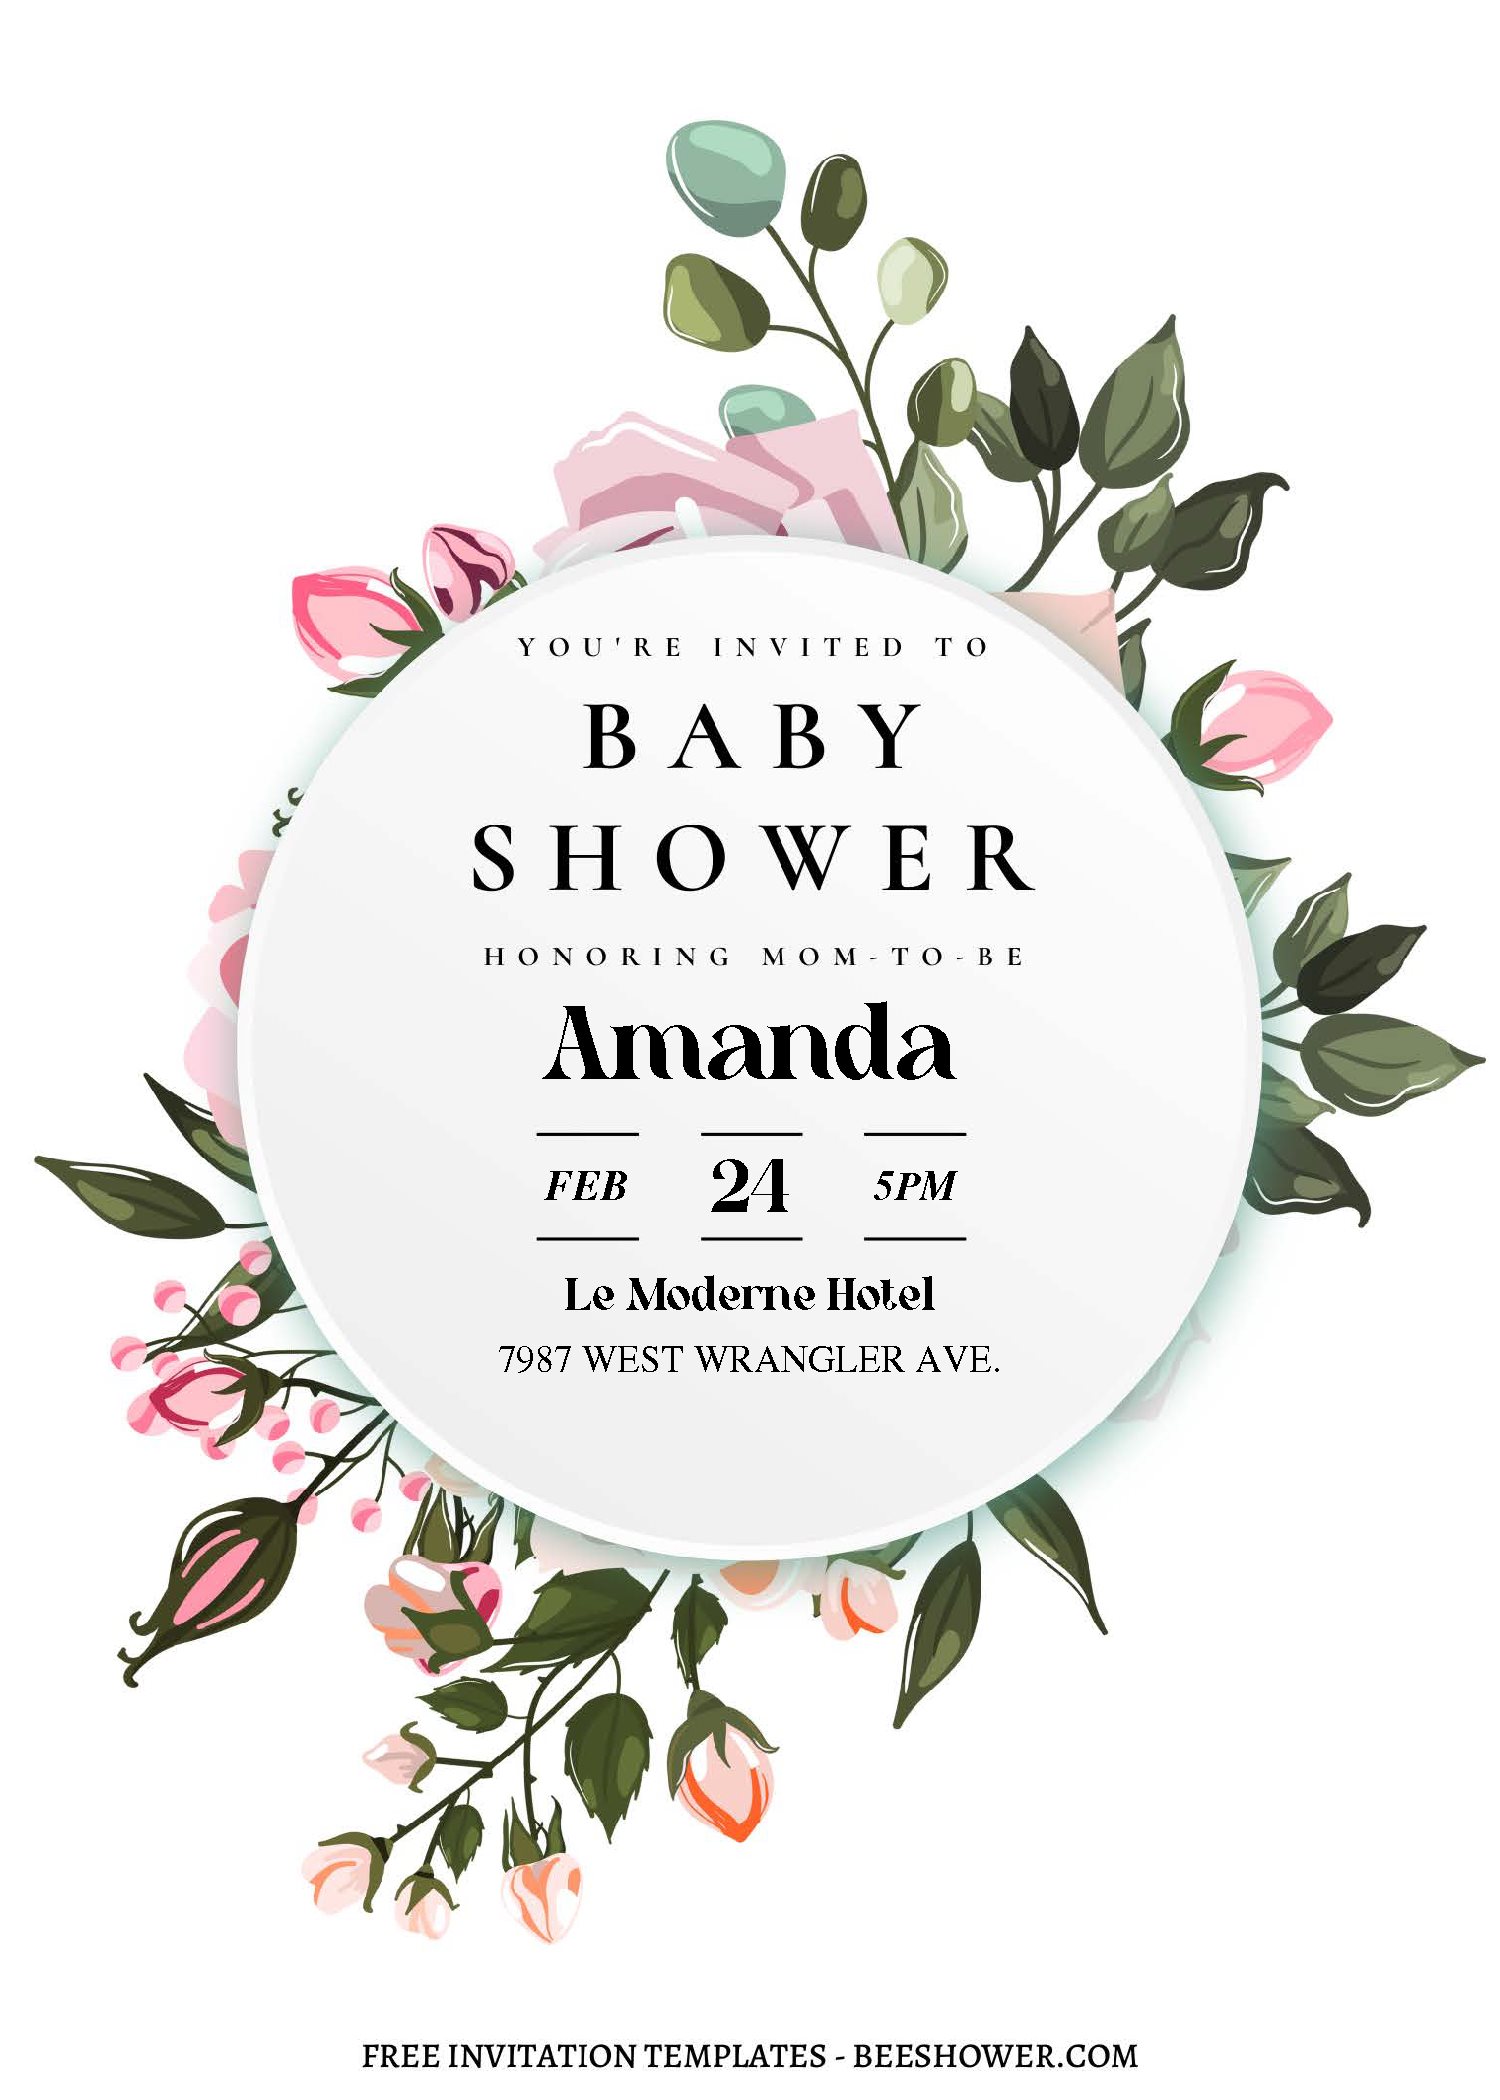 (Free Editable PDF) Watercolor Floral Wreath Baby Shower Invitation Templates